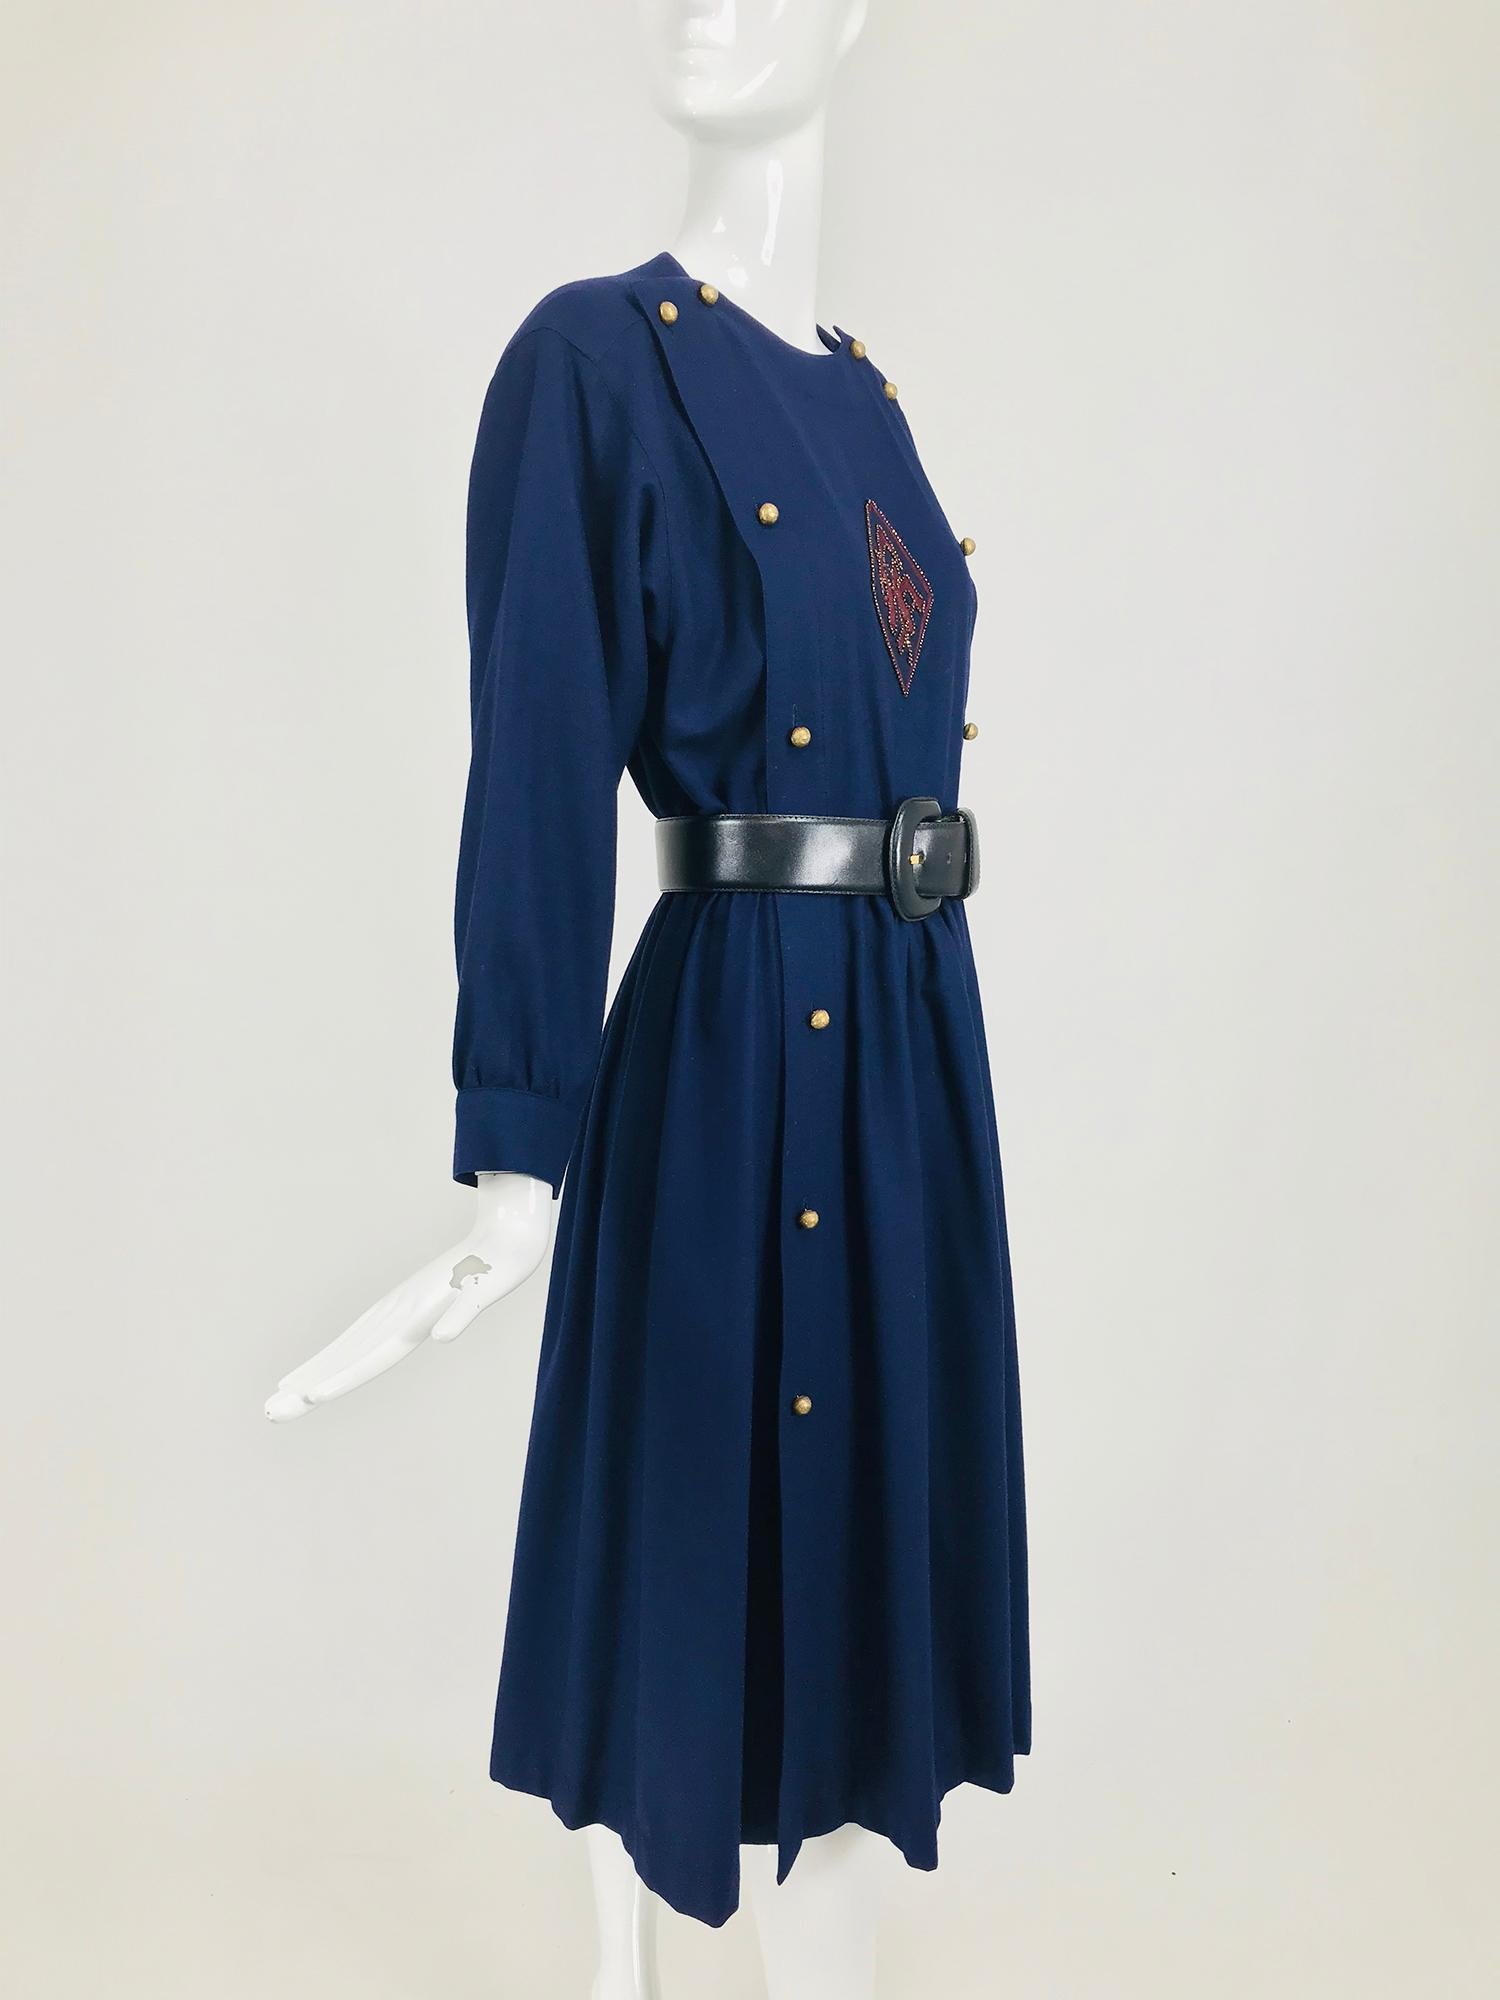 Chloe 1981 Karl Lagerfeld Blue Embroidered Button Front Dress Documented 7